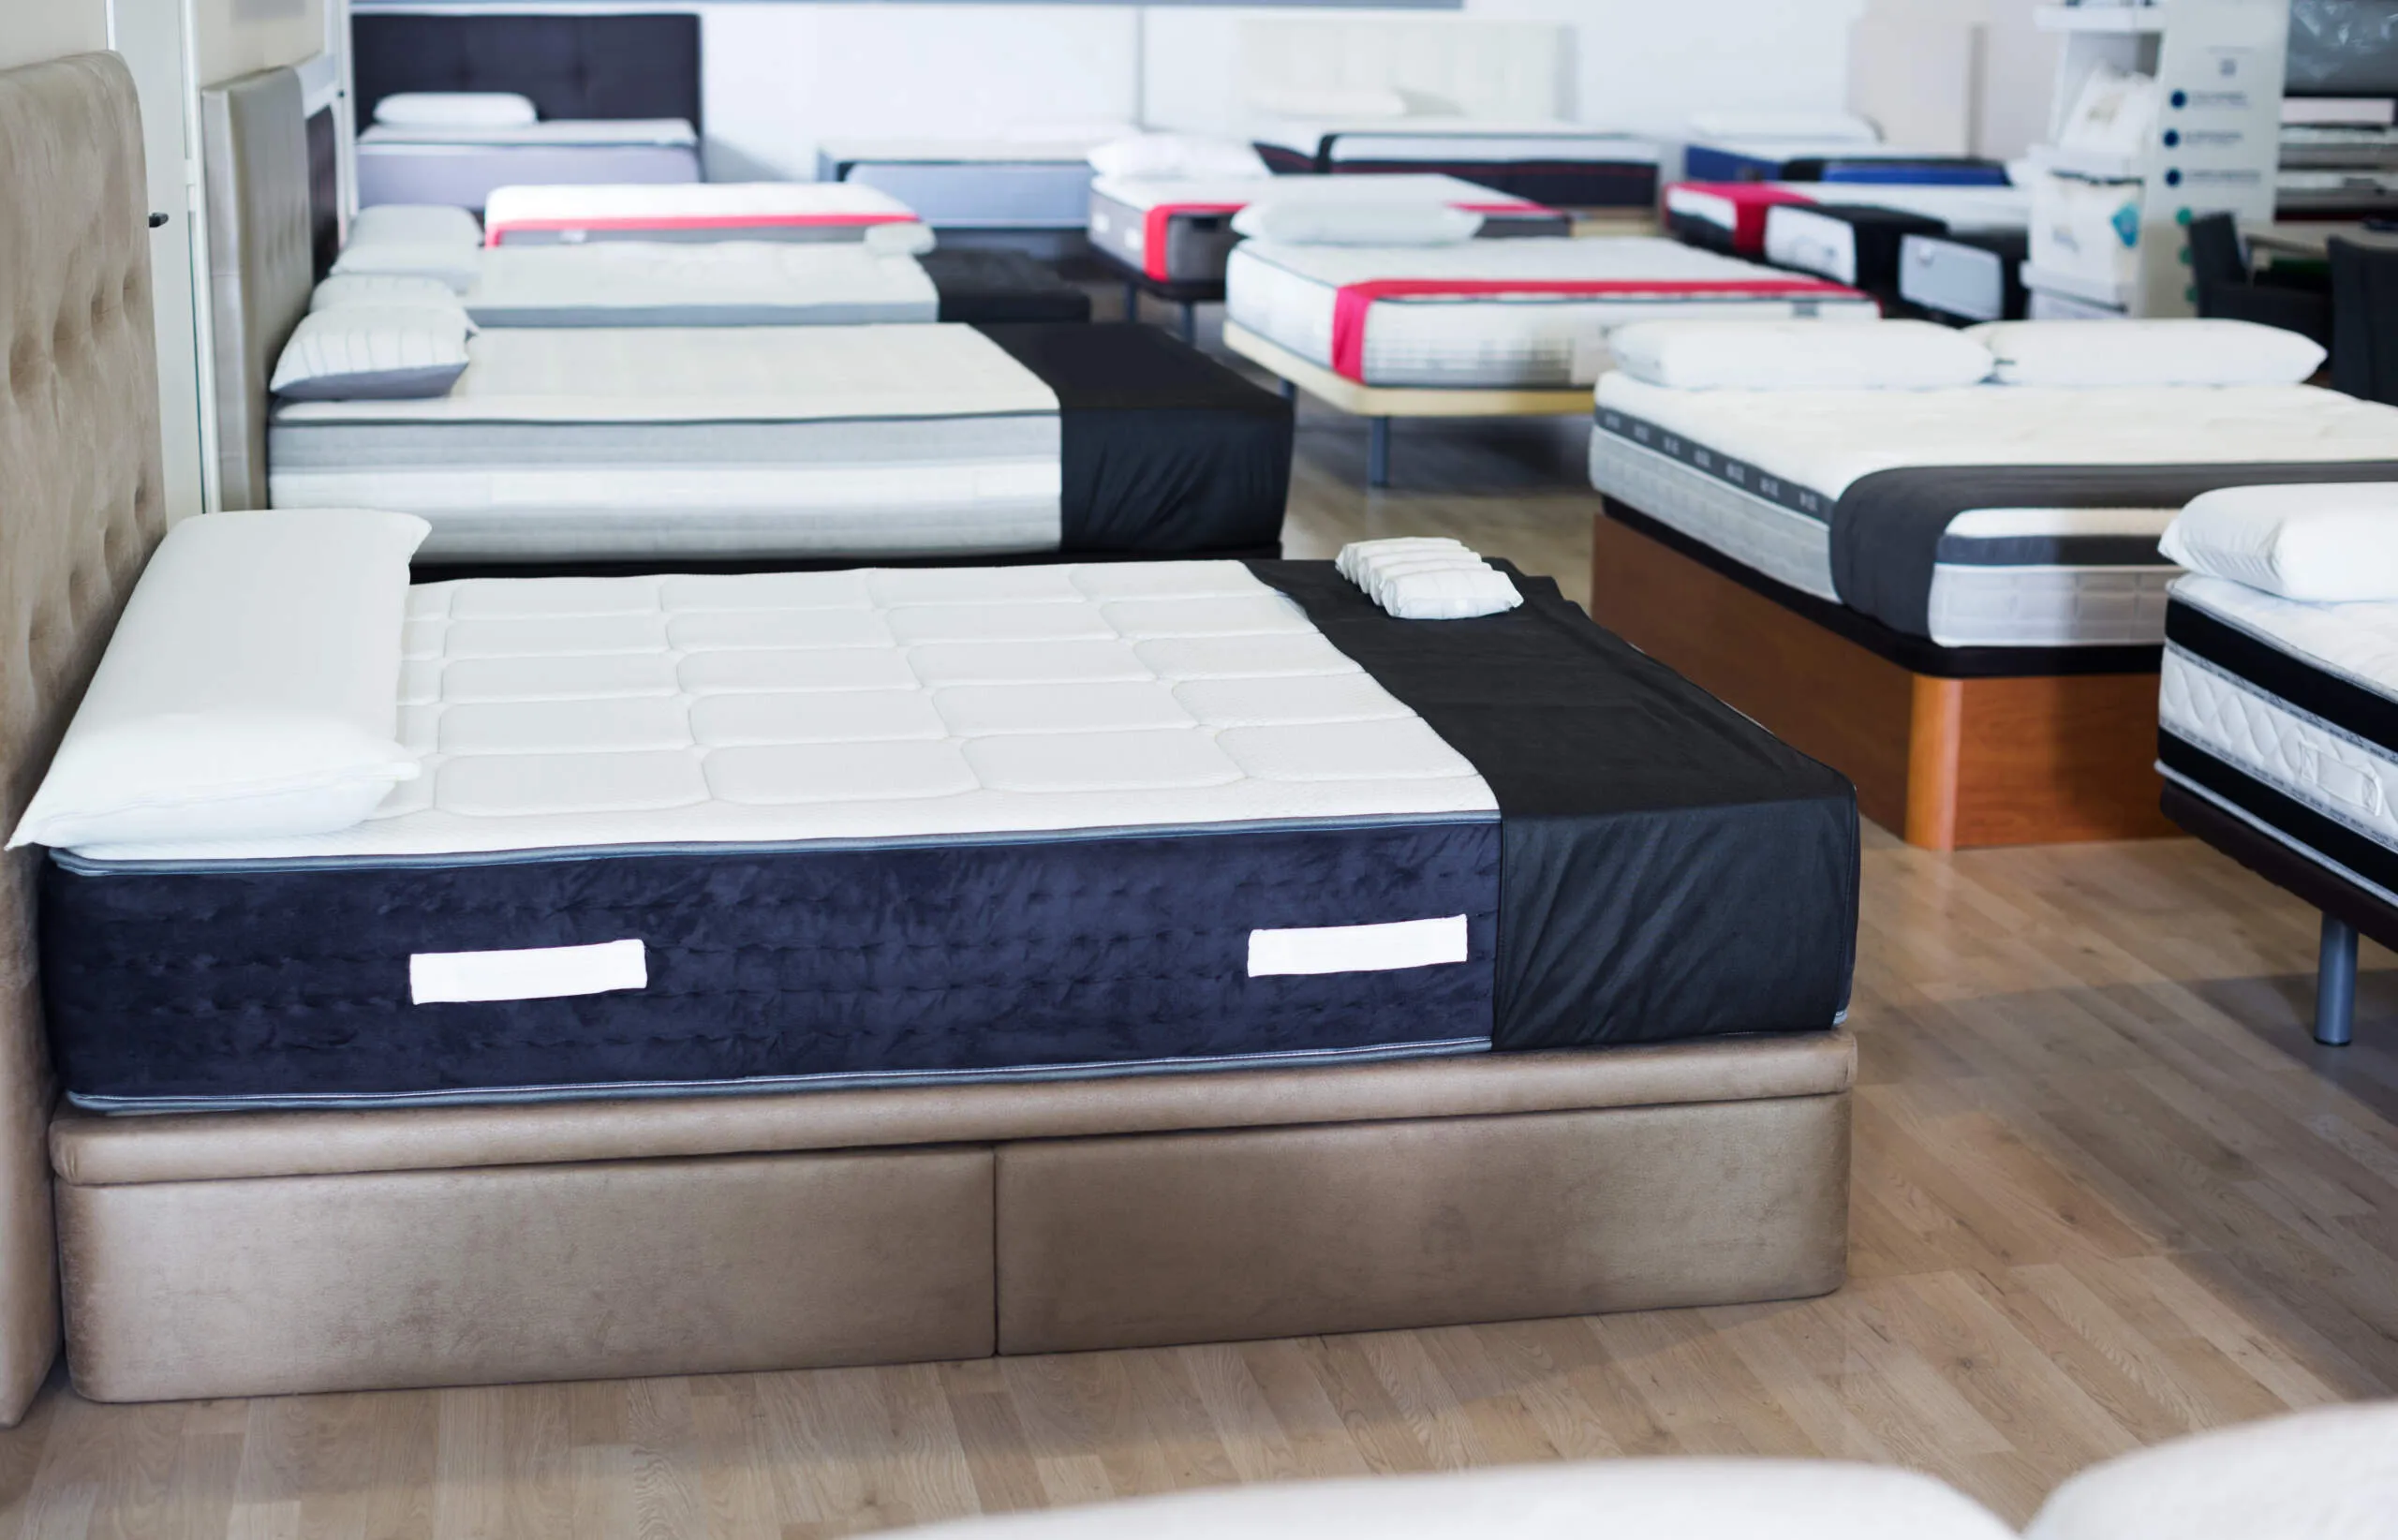 Is Your Mattress Bad for Your Health? Here’s When You Should Shop for a Replacement